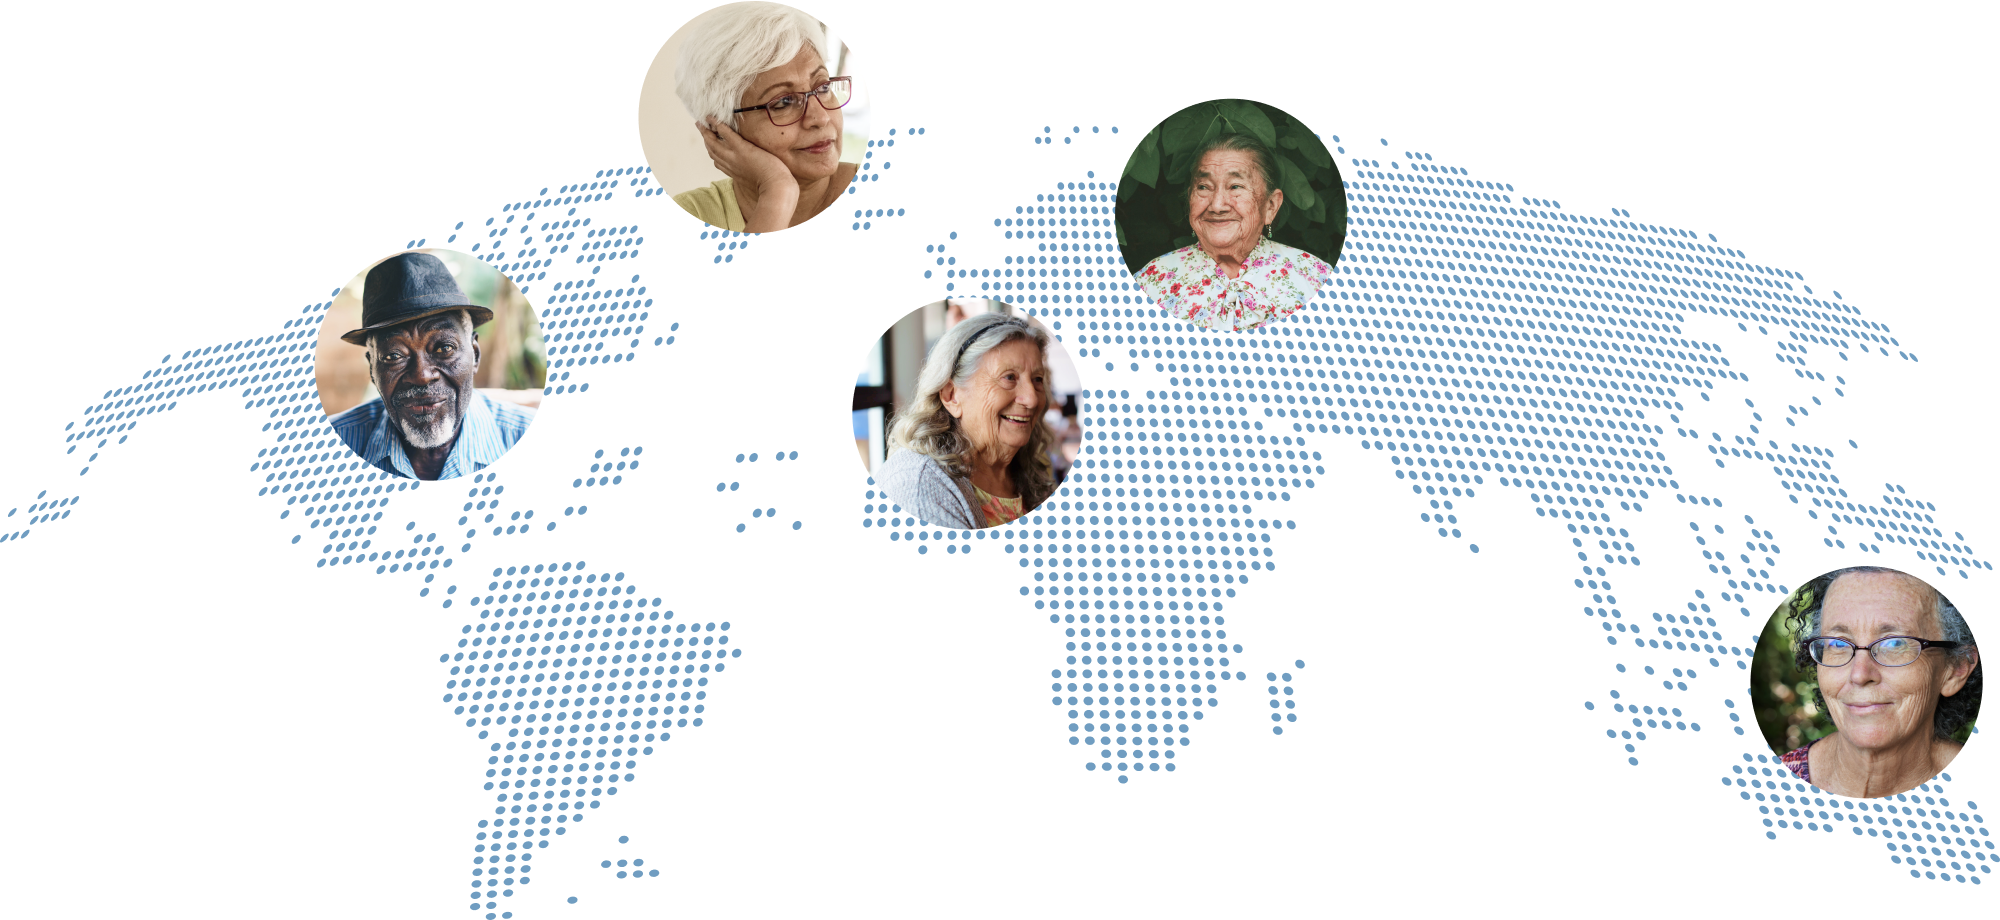 World map photo with faces pinned on it